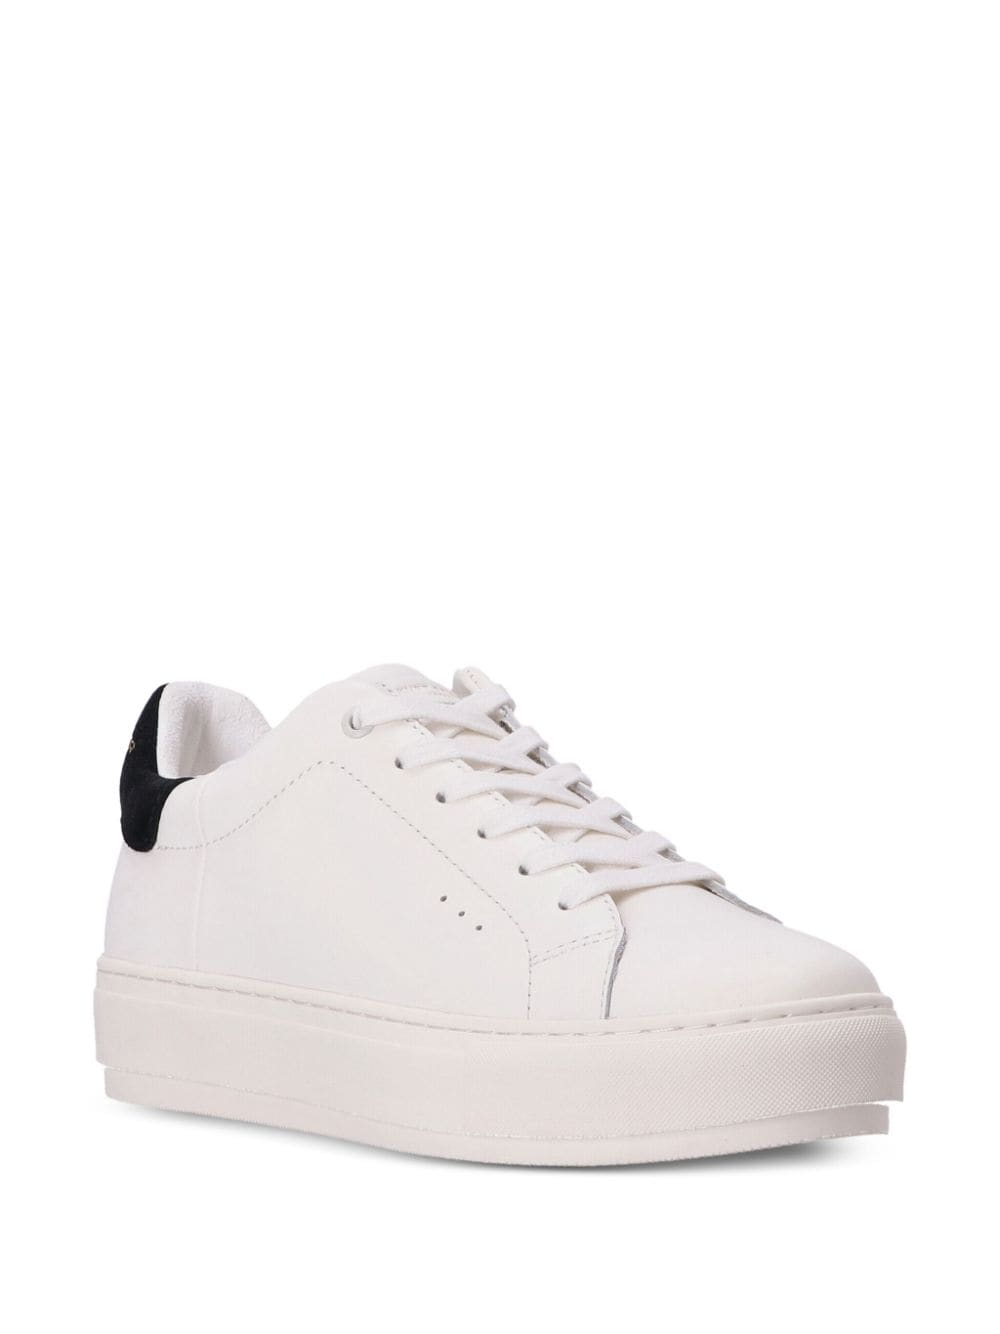 Shop Kg Kurt Geiger Laney Leather Trainers In White